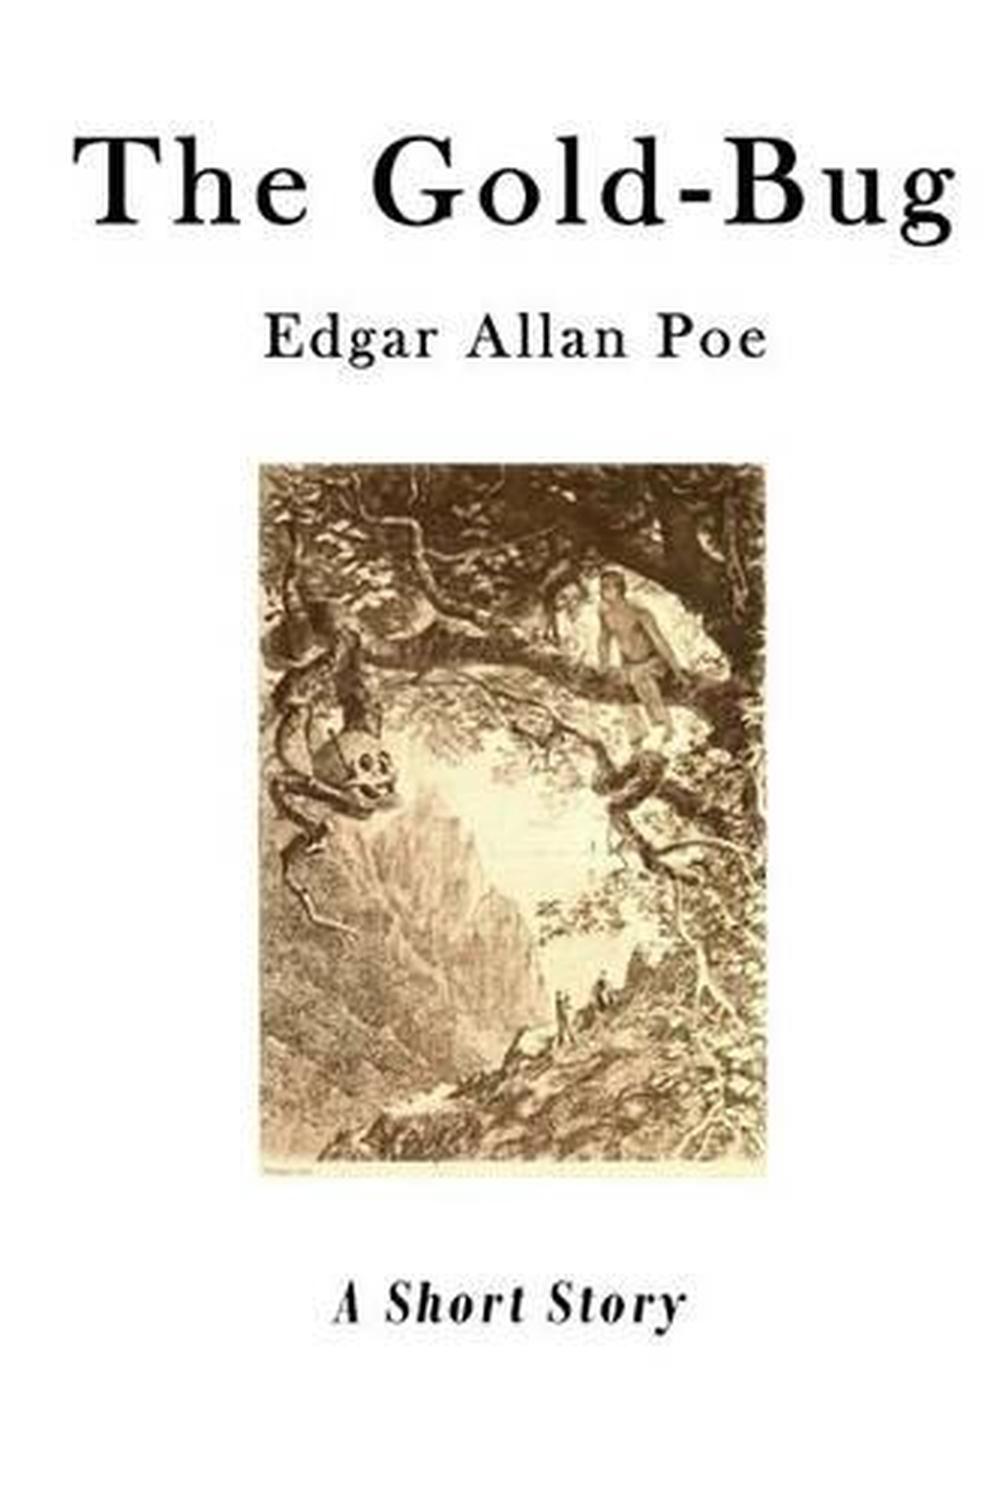 The Gold Bug by Edgar Allan Poe (English) Paperback Book Free Shipping